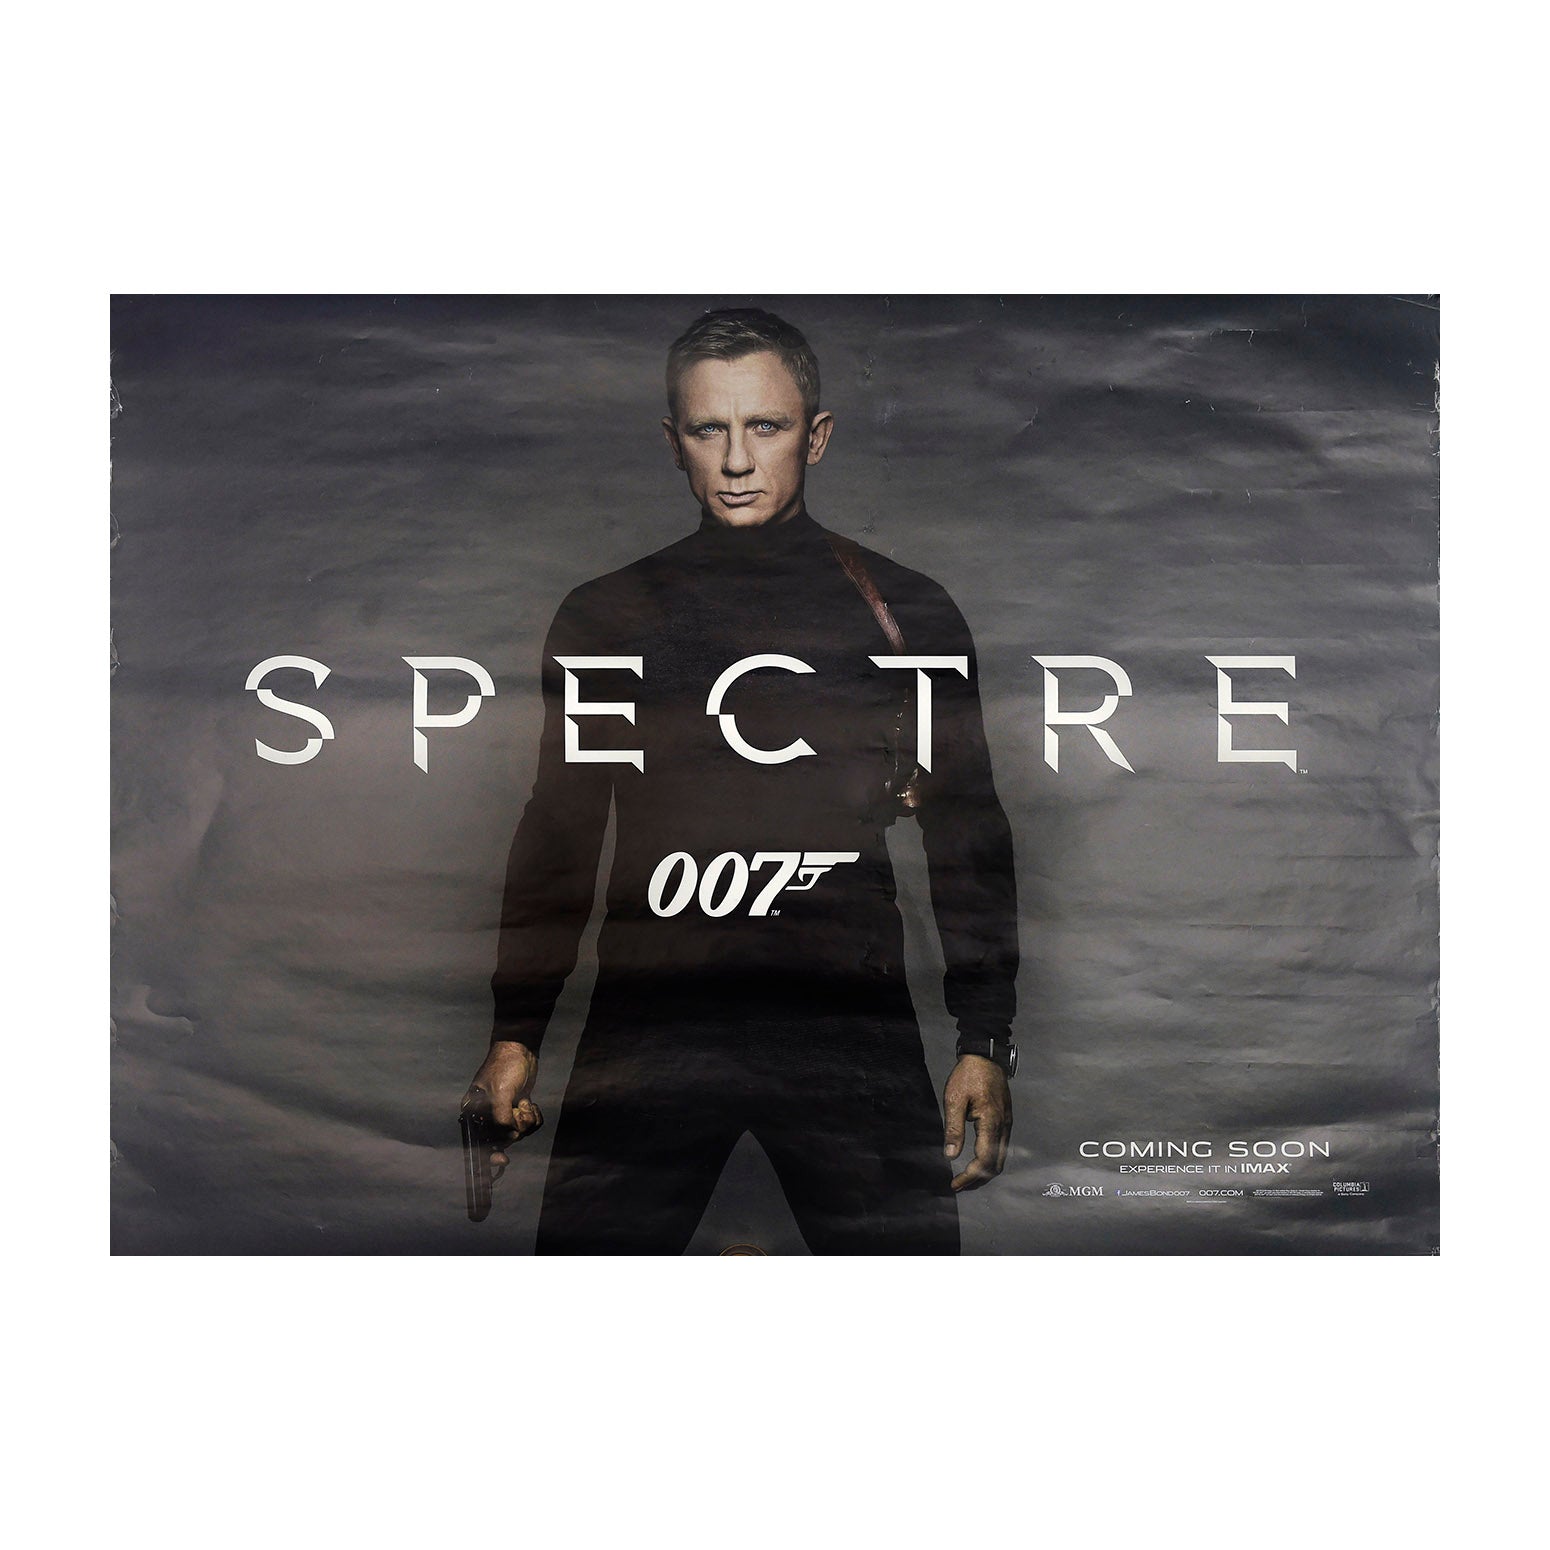 Original, pre-release, UK quad James Bond movie poster, Spectre, 2015. This is the version printed for Imax cinemas, with the ‘coming soon’ tagline